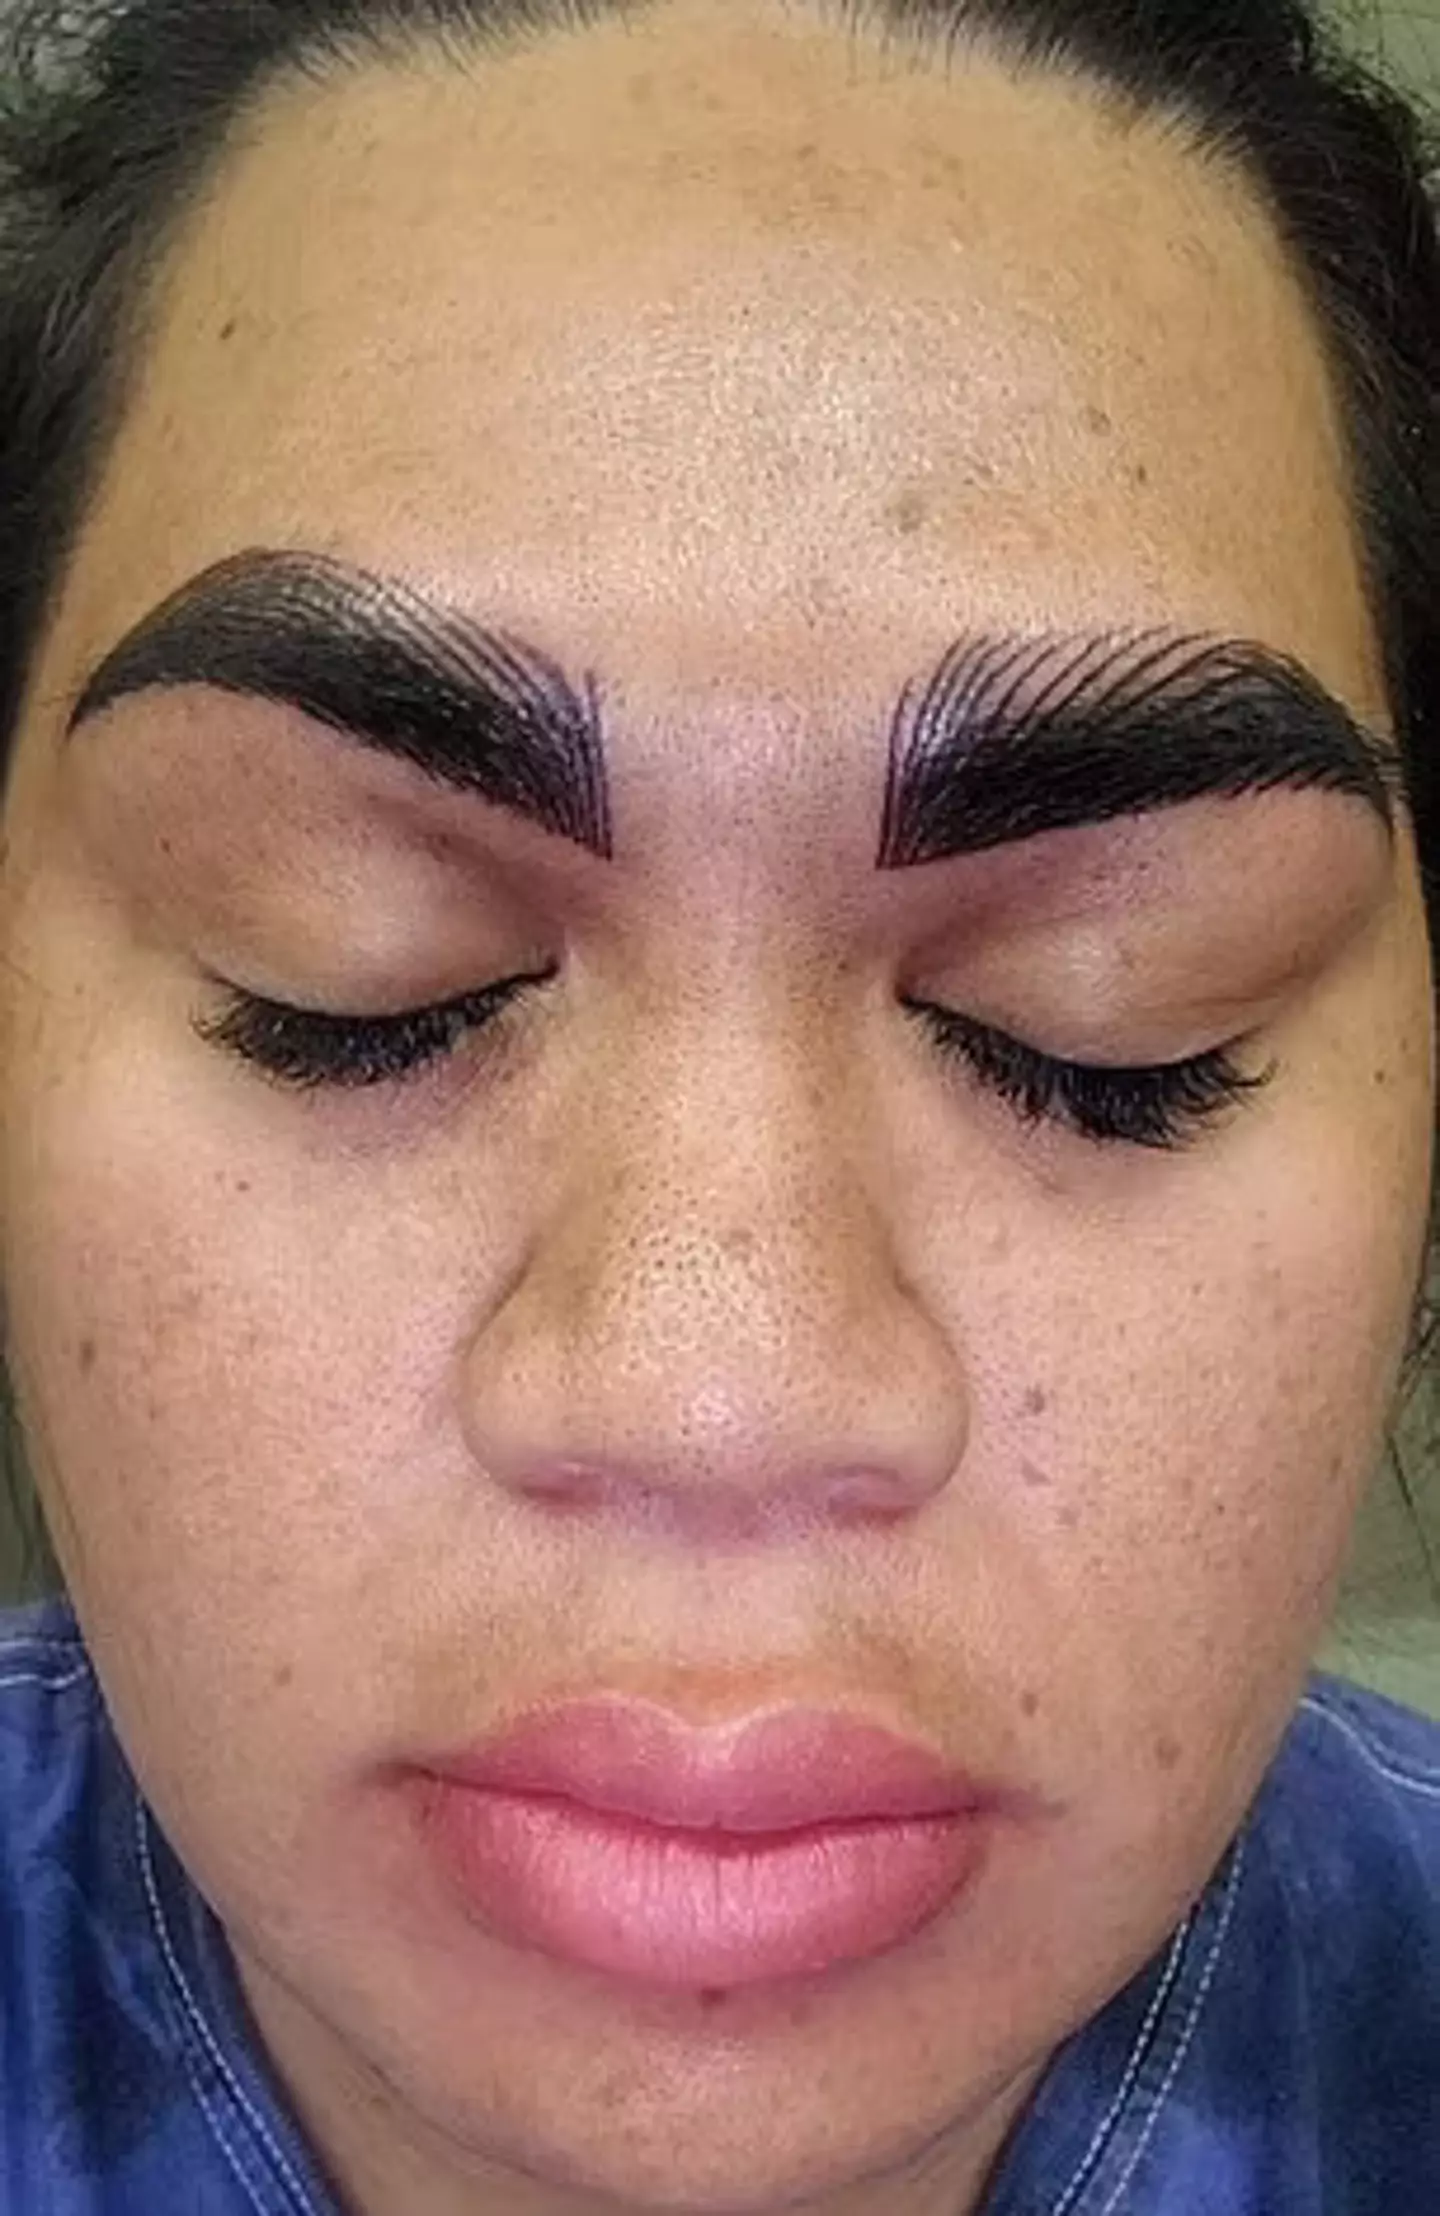 And after microblading.